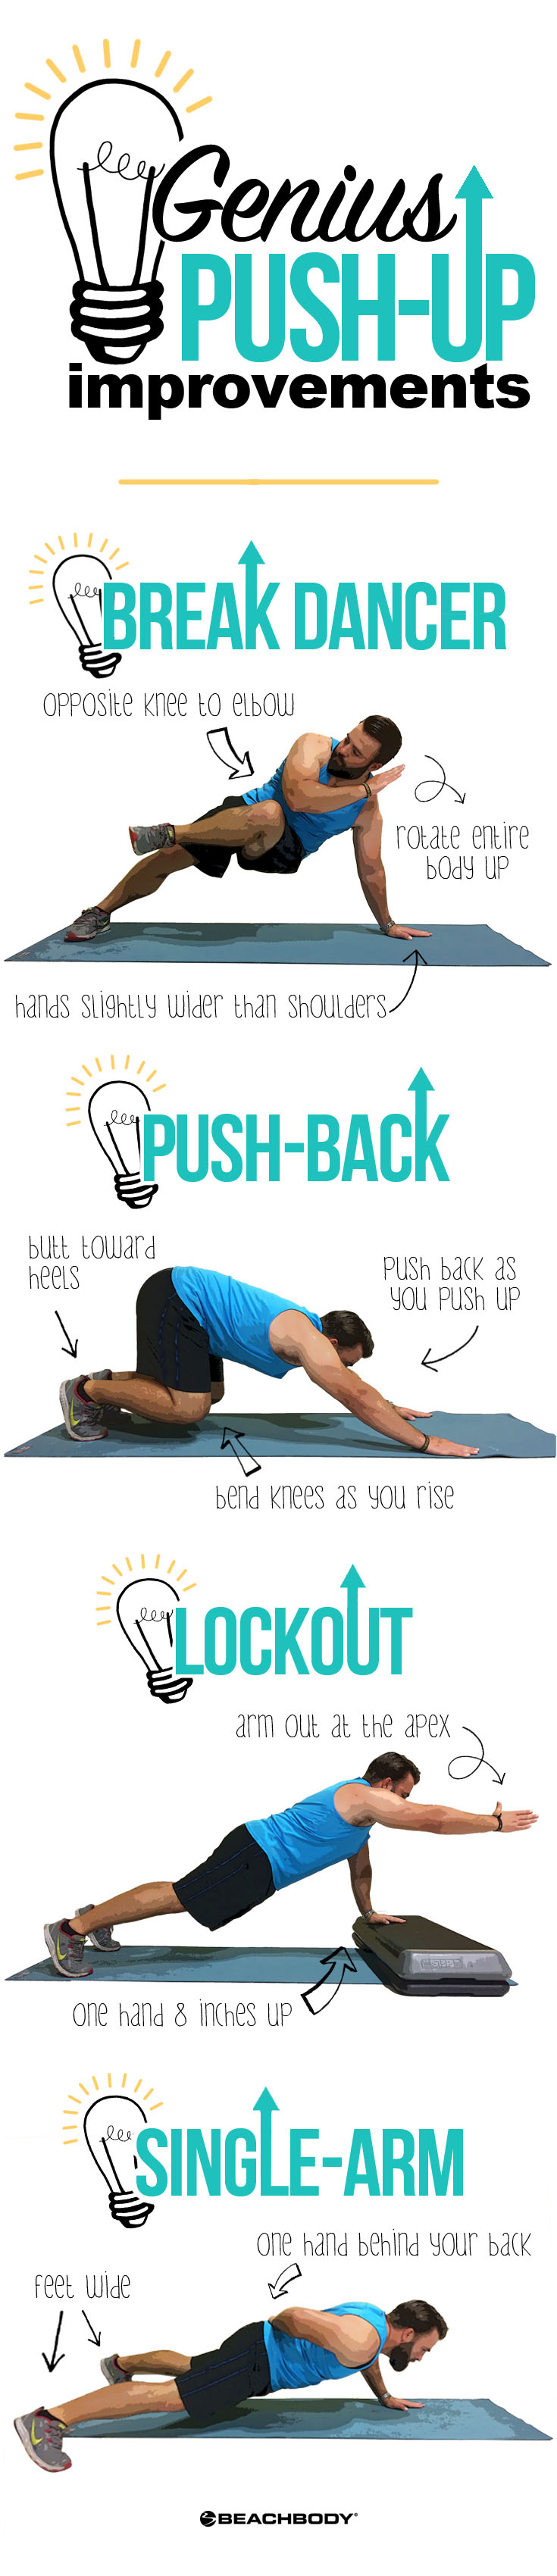 The best core workouts start with push-ups. Check out these genius push-up improvements for the best core strengthening exercises.